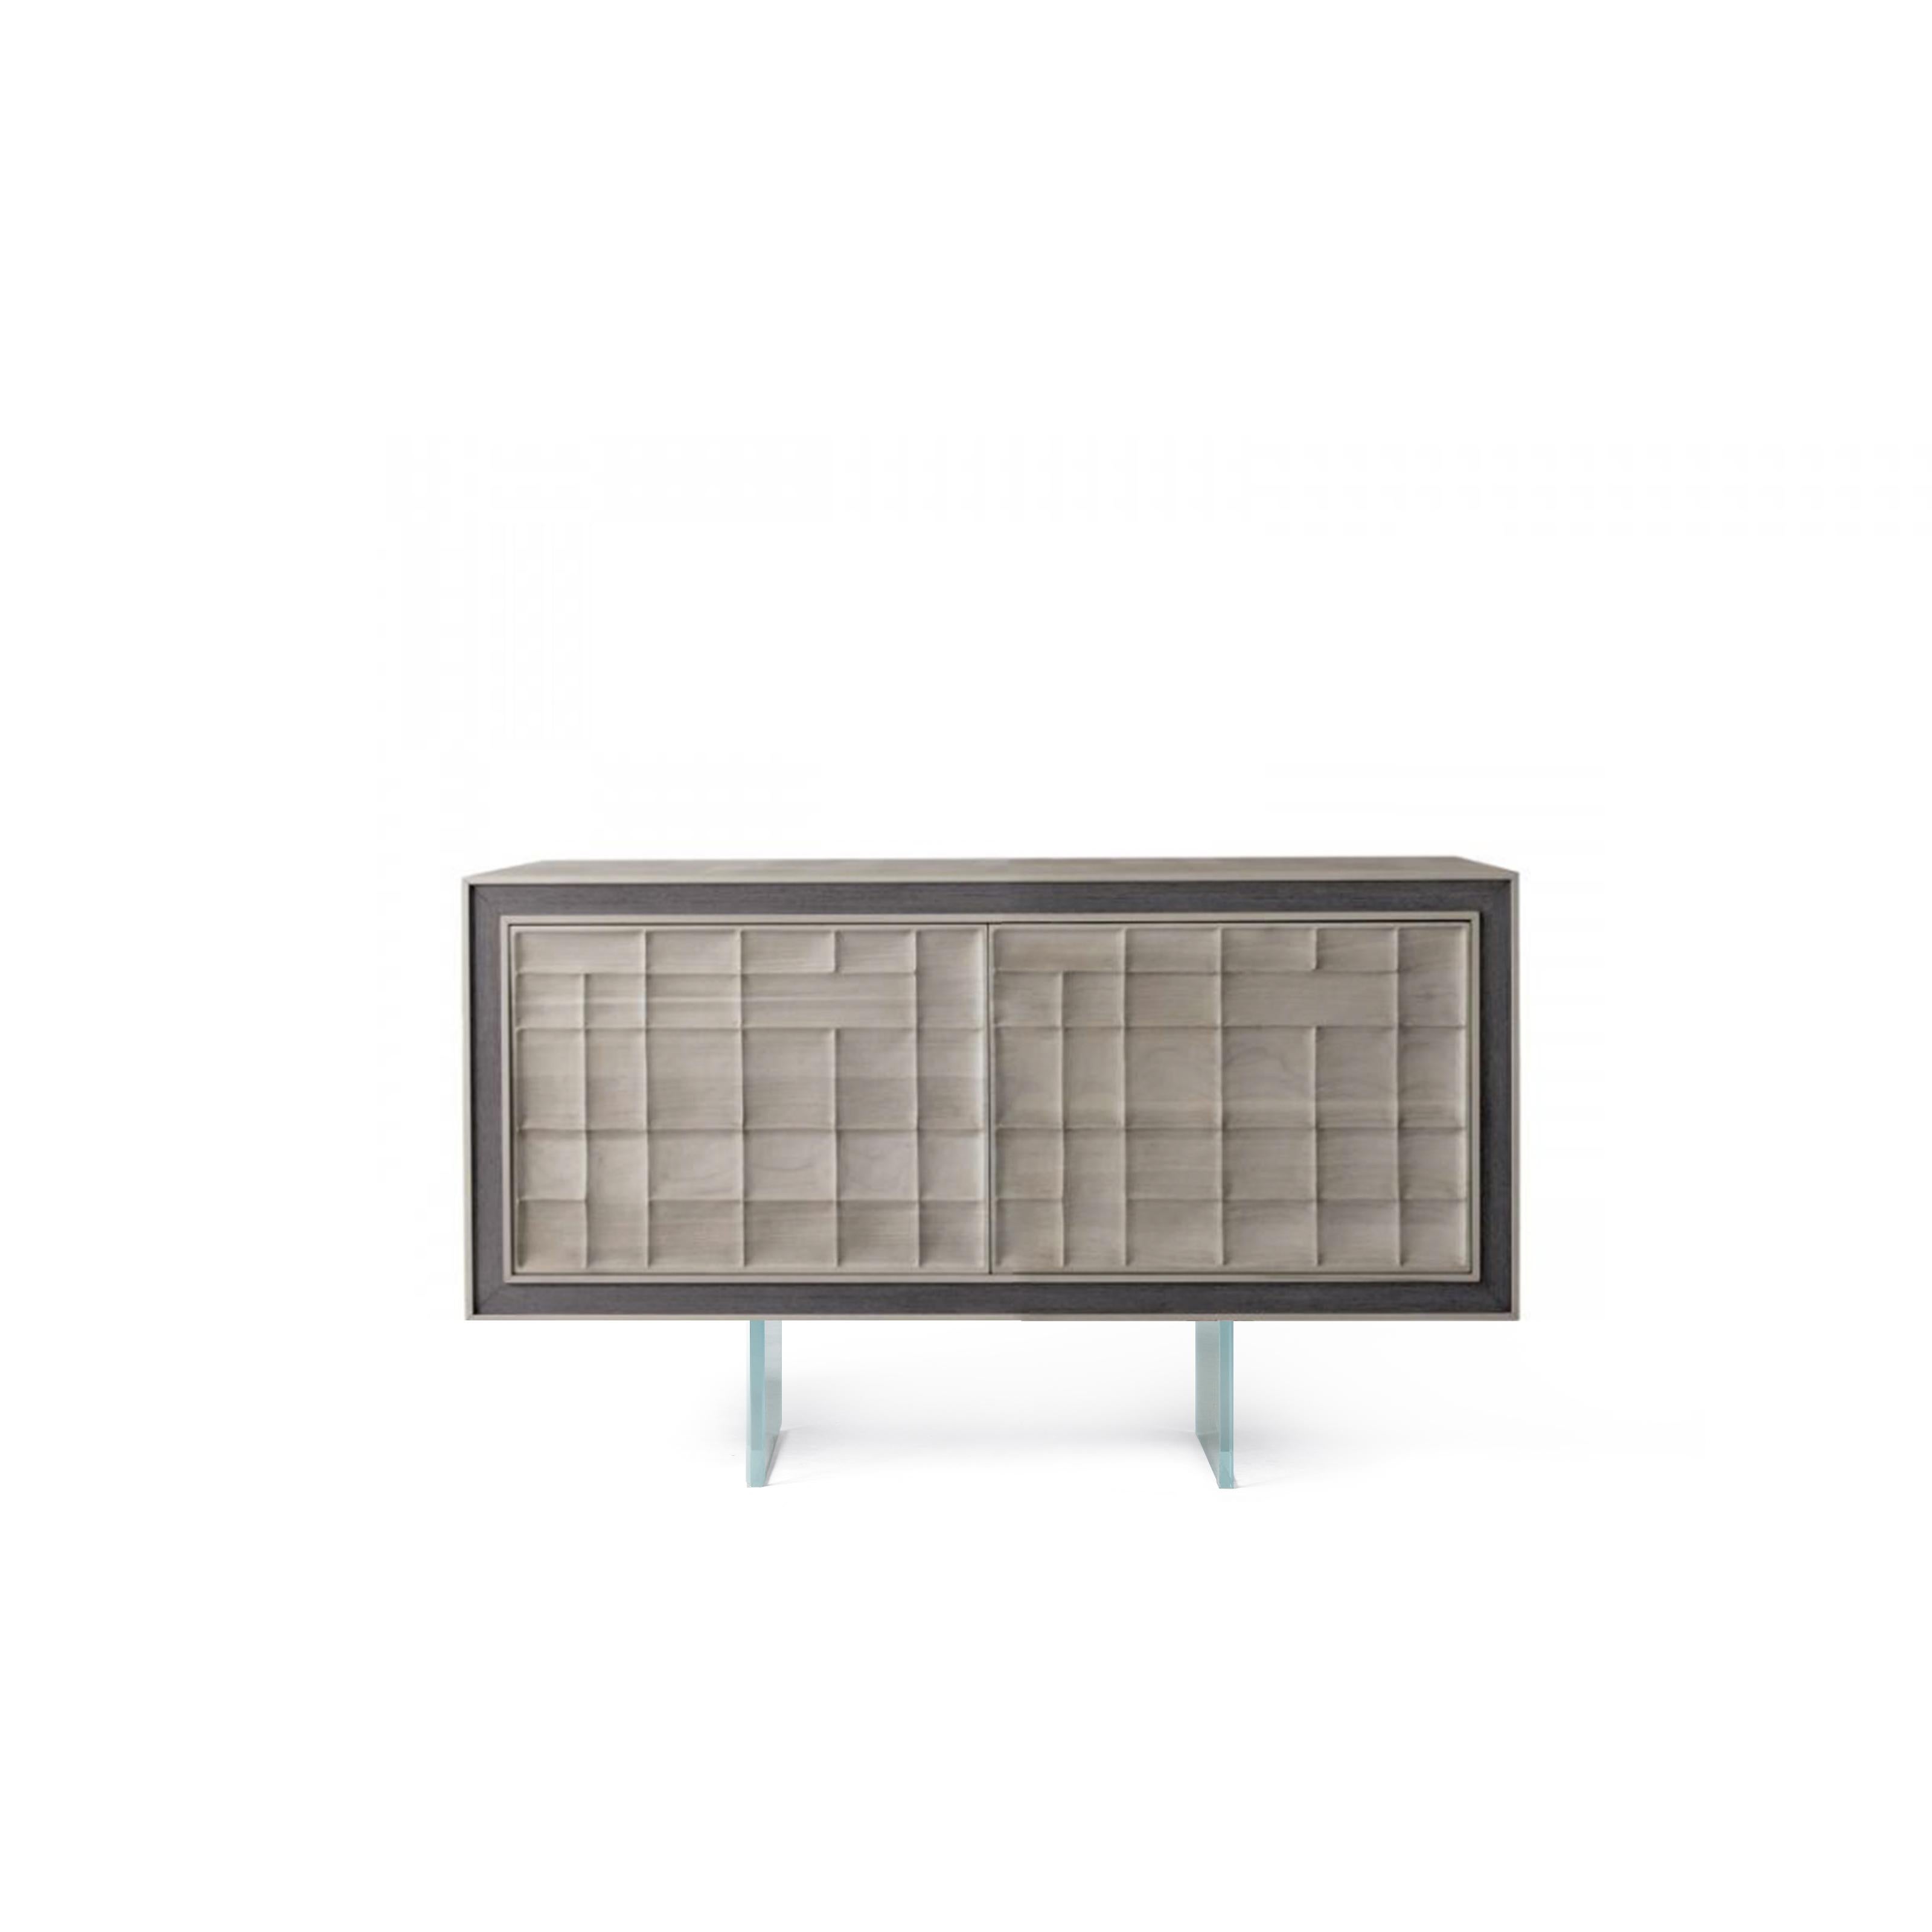 Italian Quadra Scacco Solid Wood Sideboard, Walnut in Natural Grey Finish, Contemporary For Sale